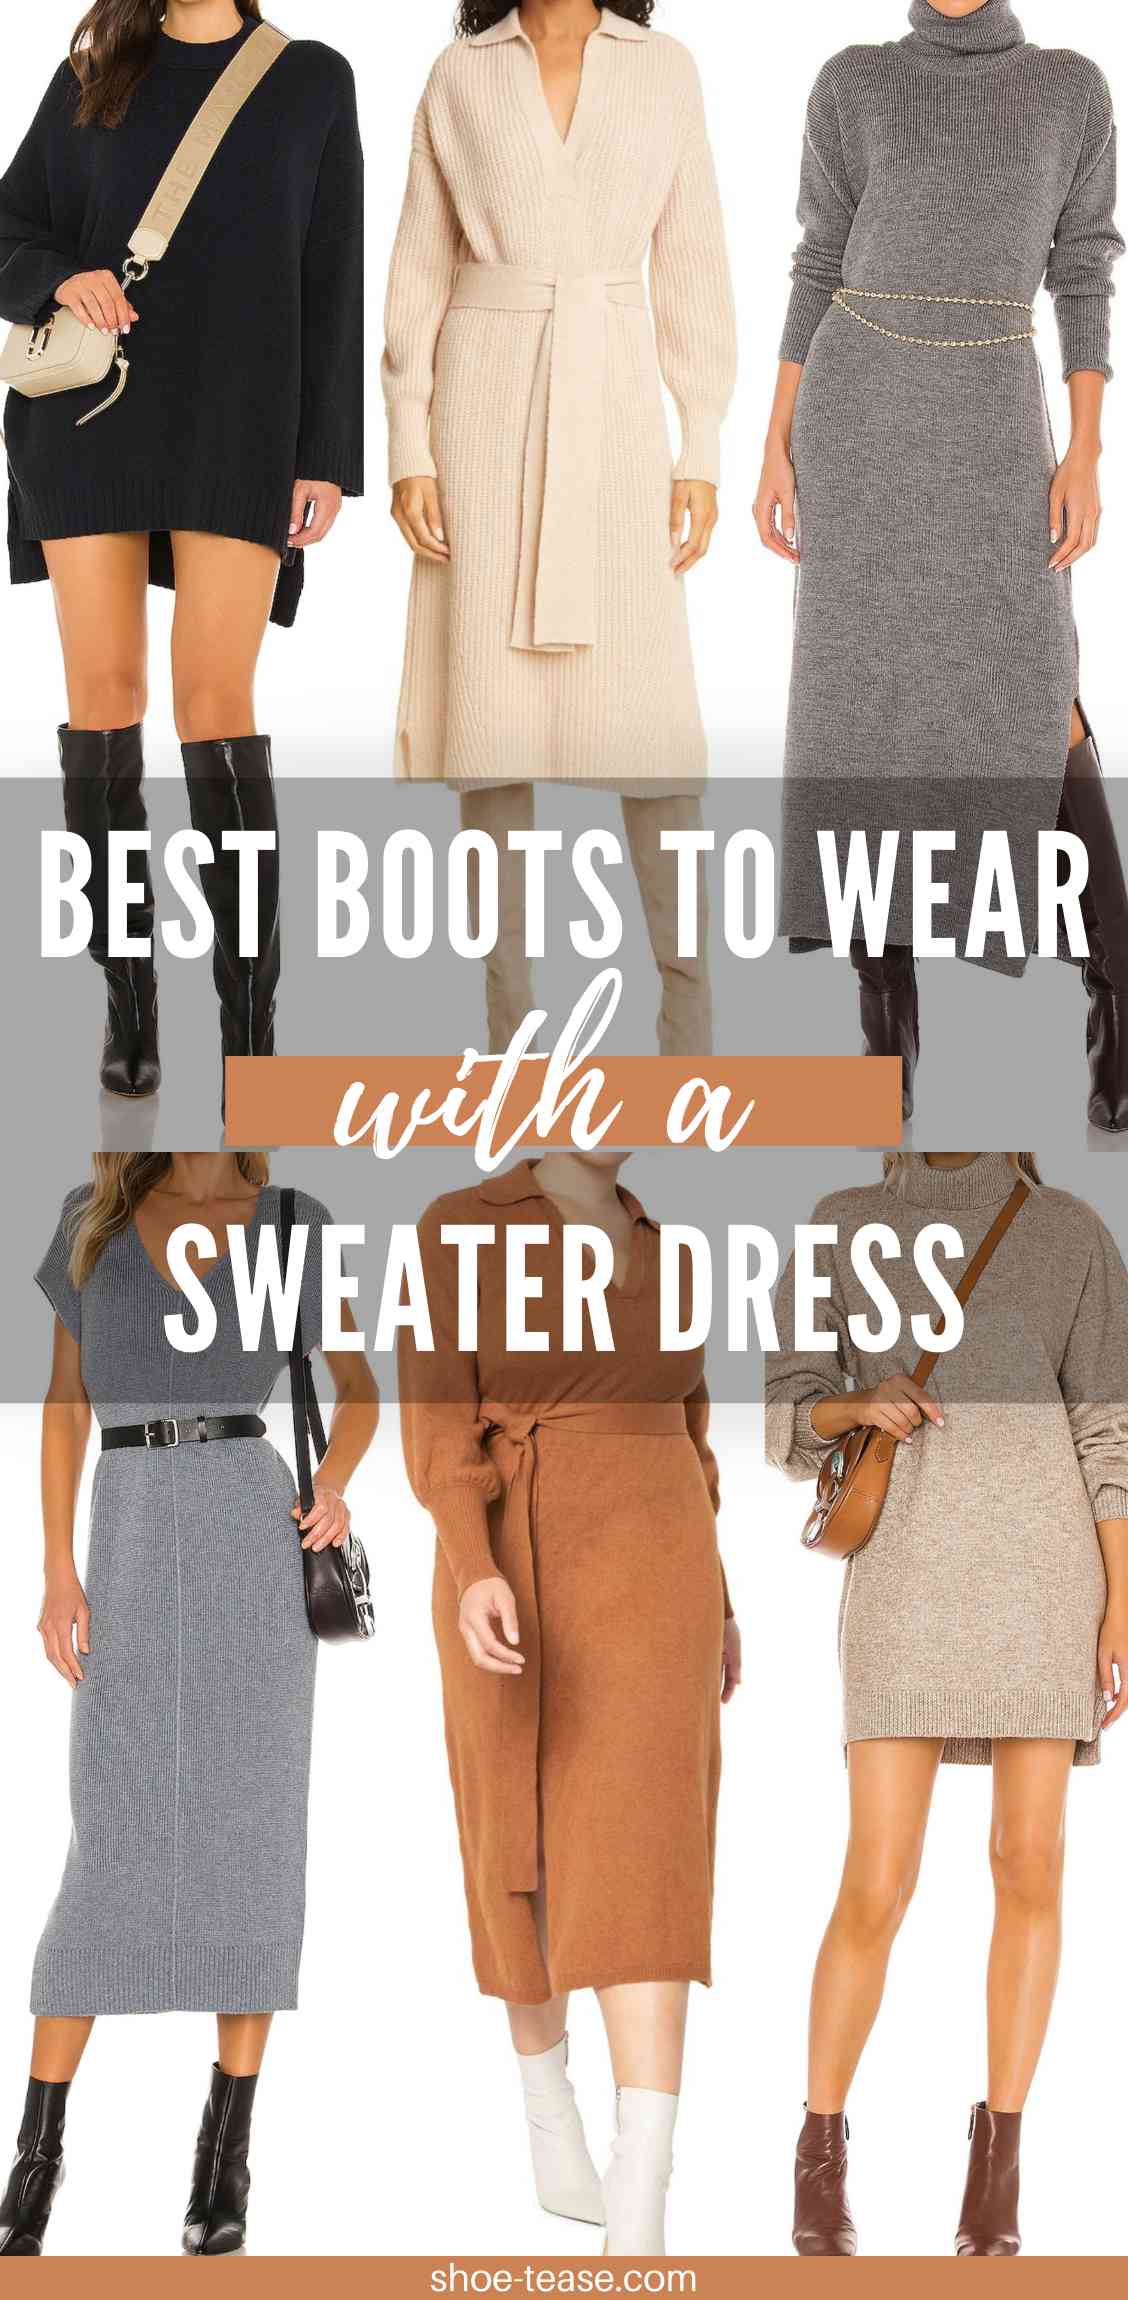 What to wear with sweater dresses